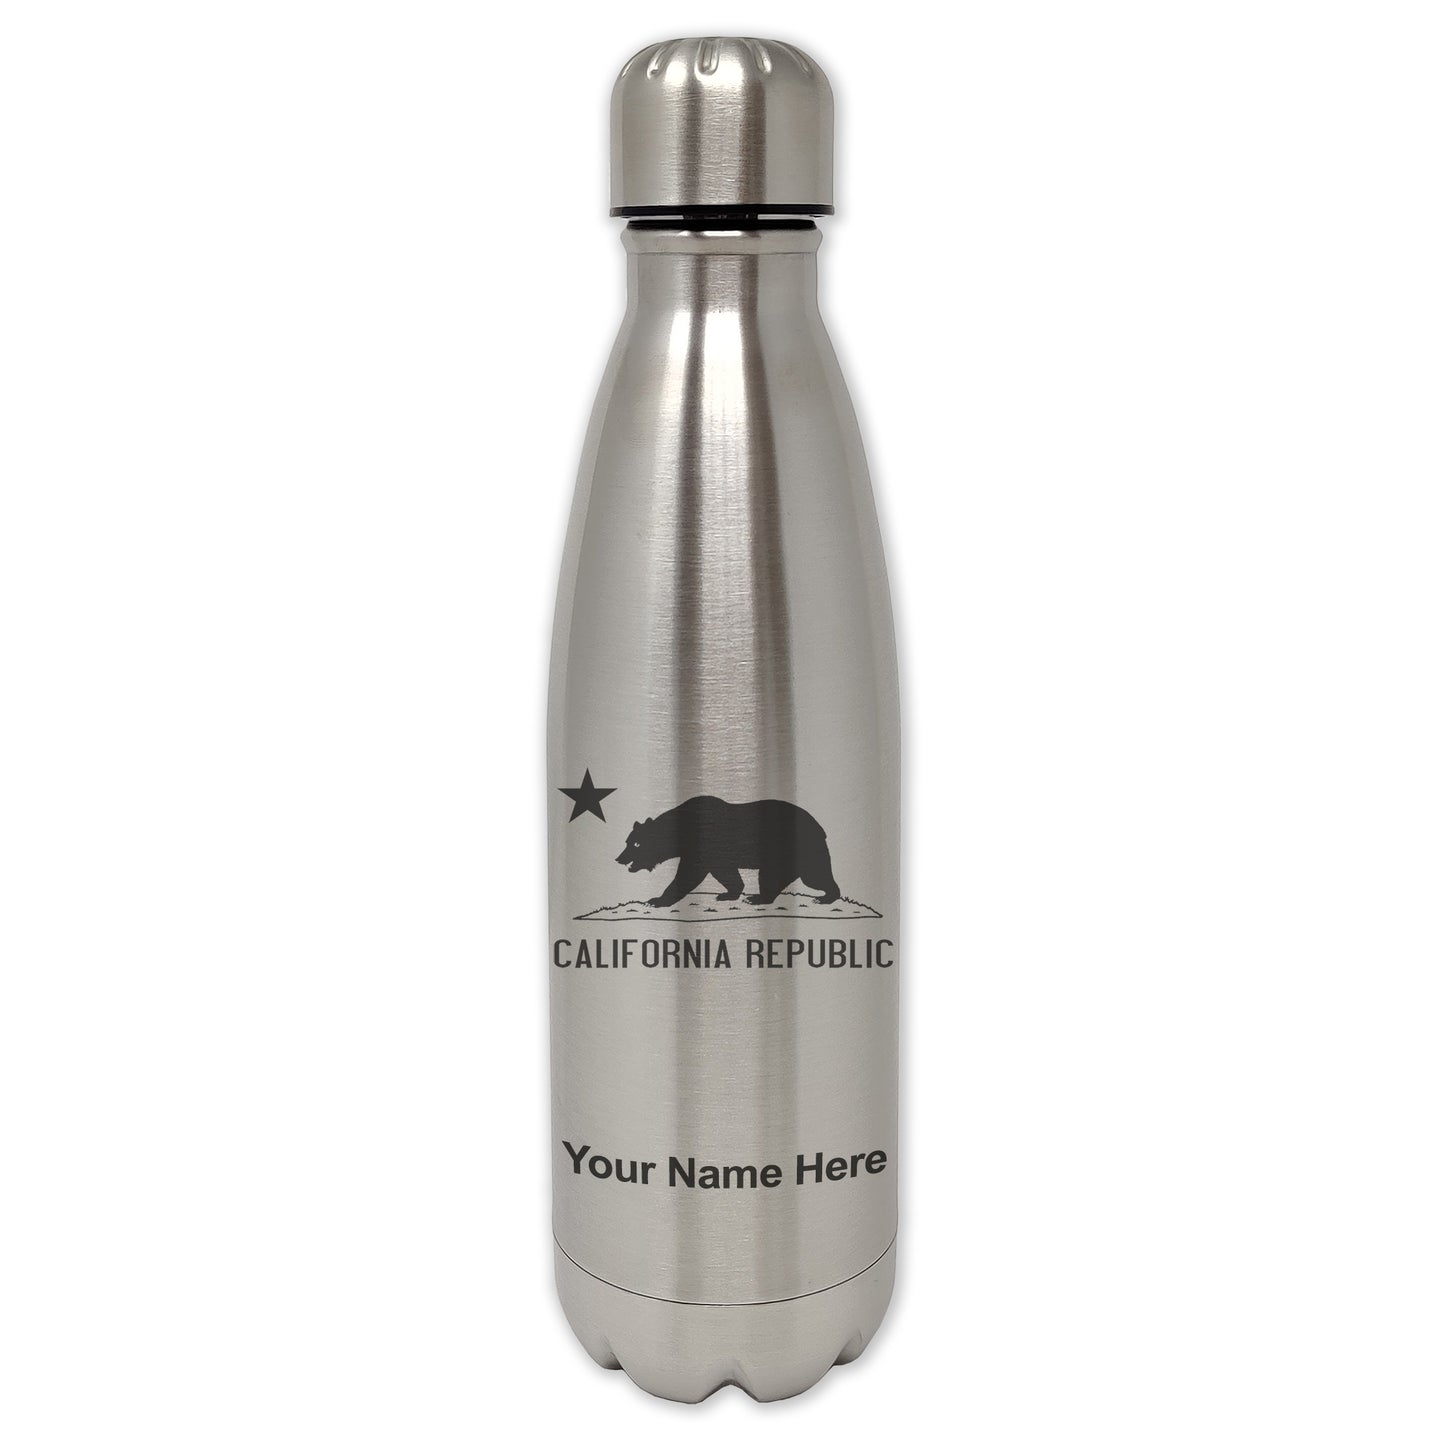 LaserGram Single Wall Water Bottle, California Republic Bear Flag, Personalized Engraving Included